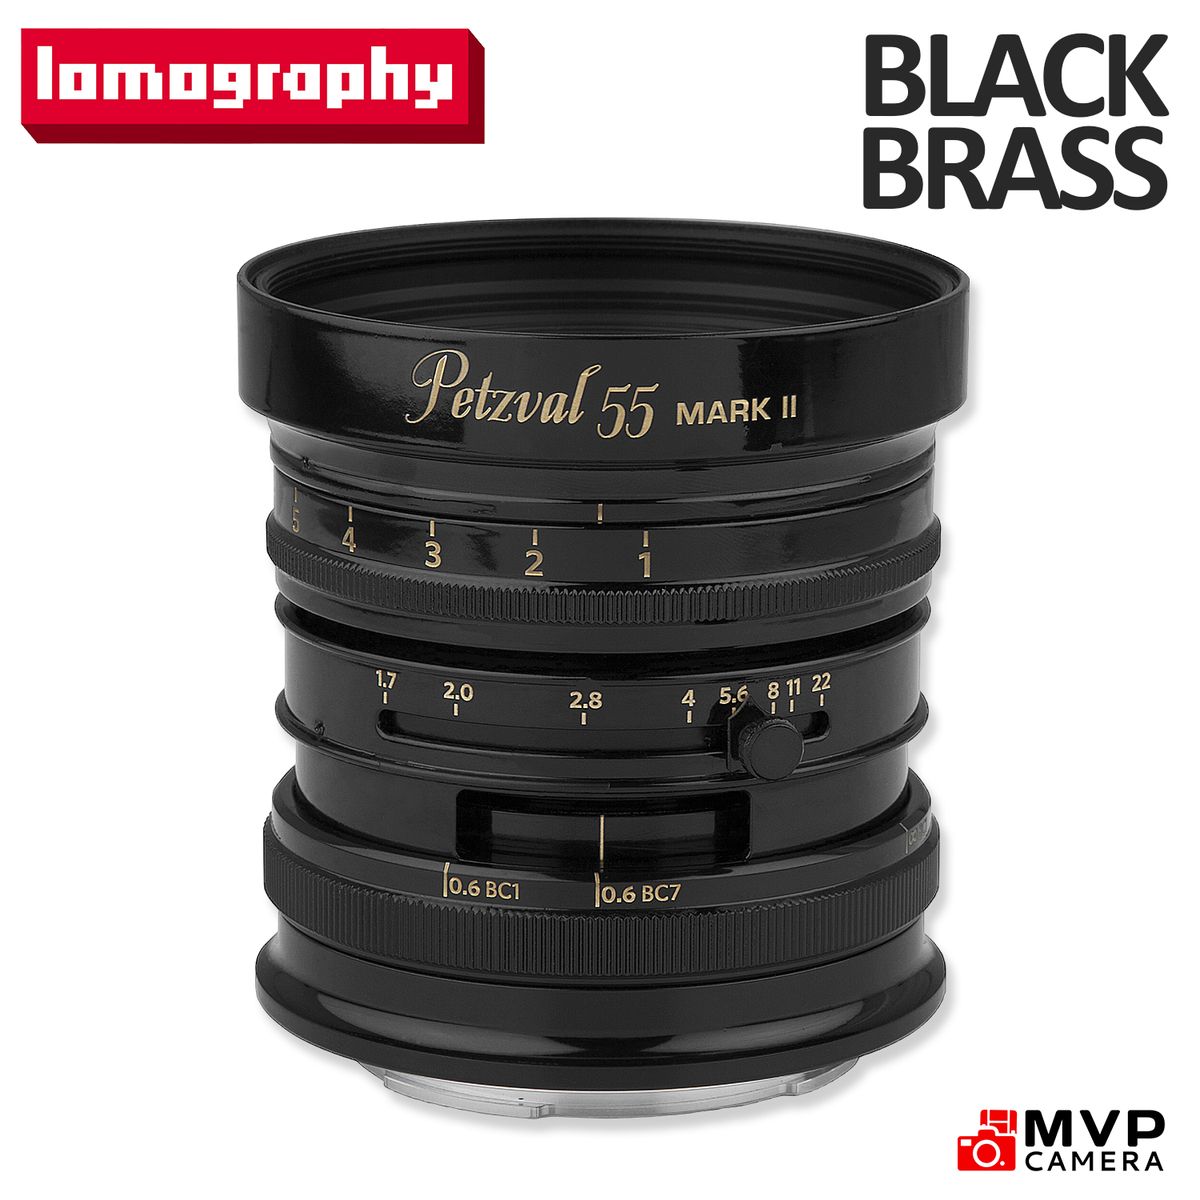 [OFFICIAL PH] LOMOGRAPHY NEW Petzval 55mm f1.7 MKII Nikon ...